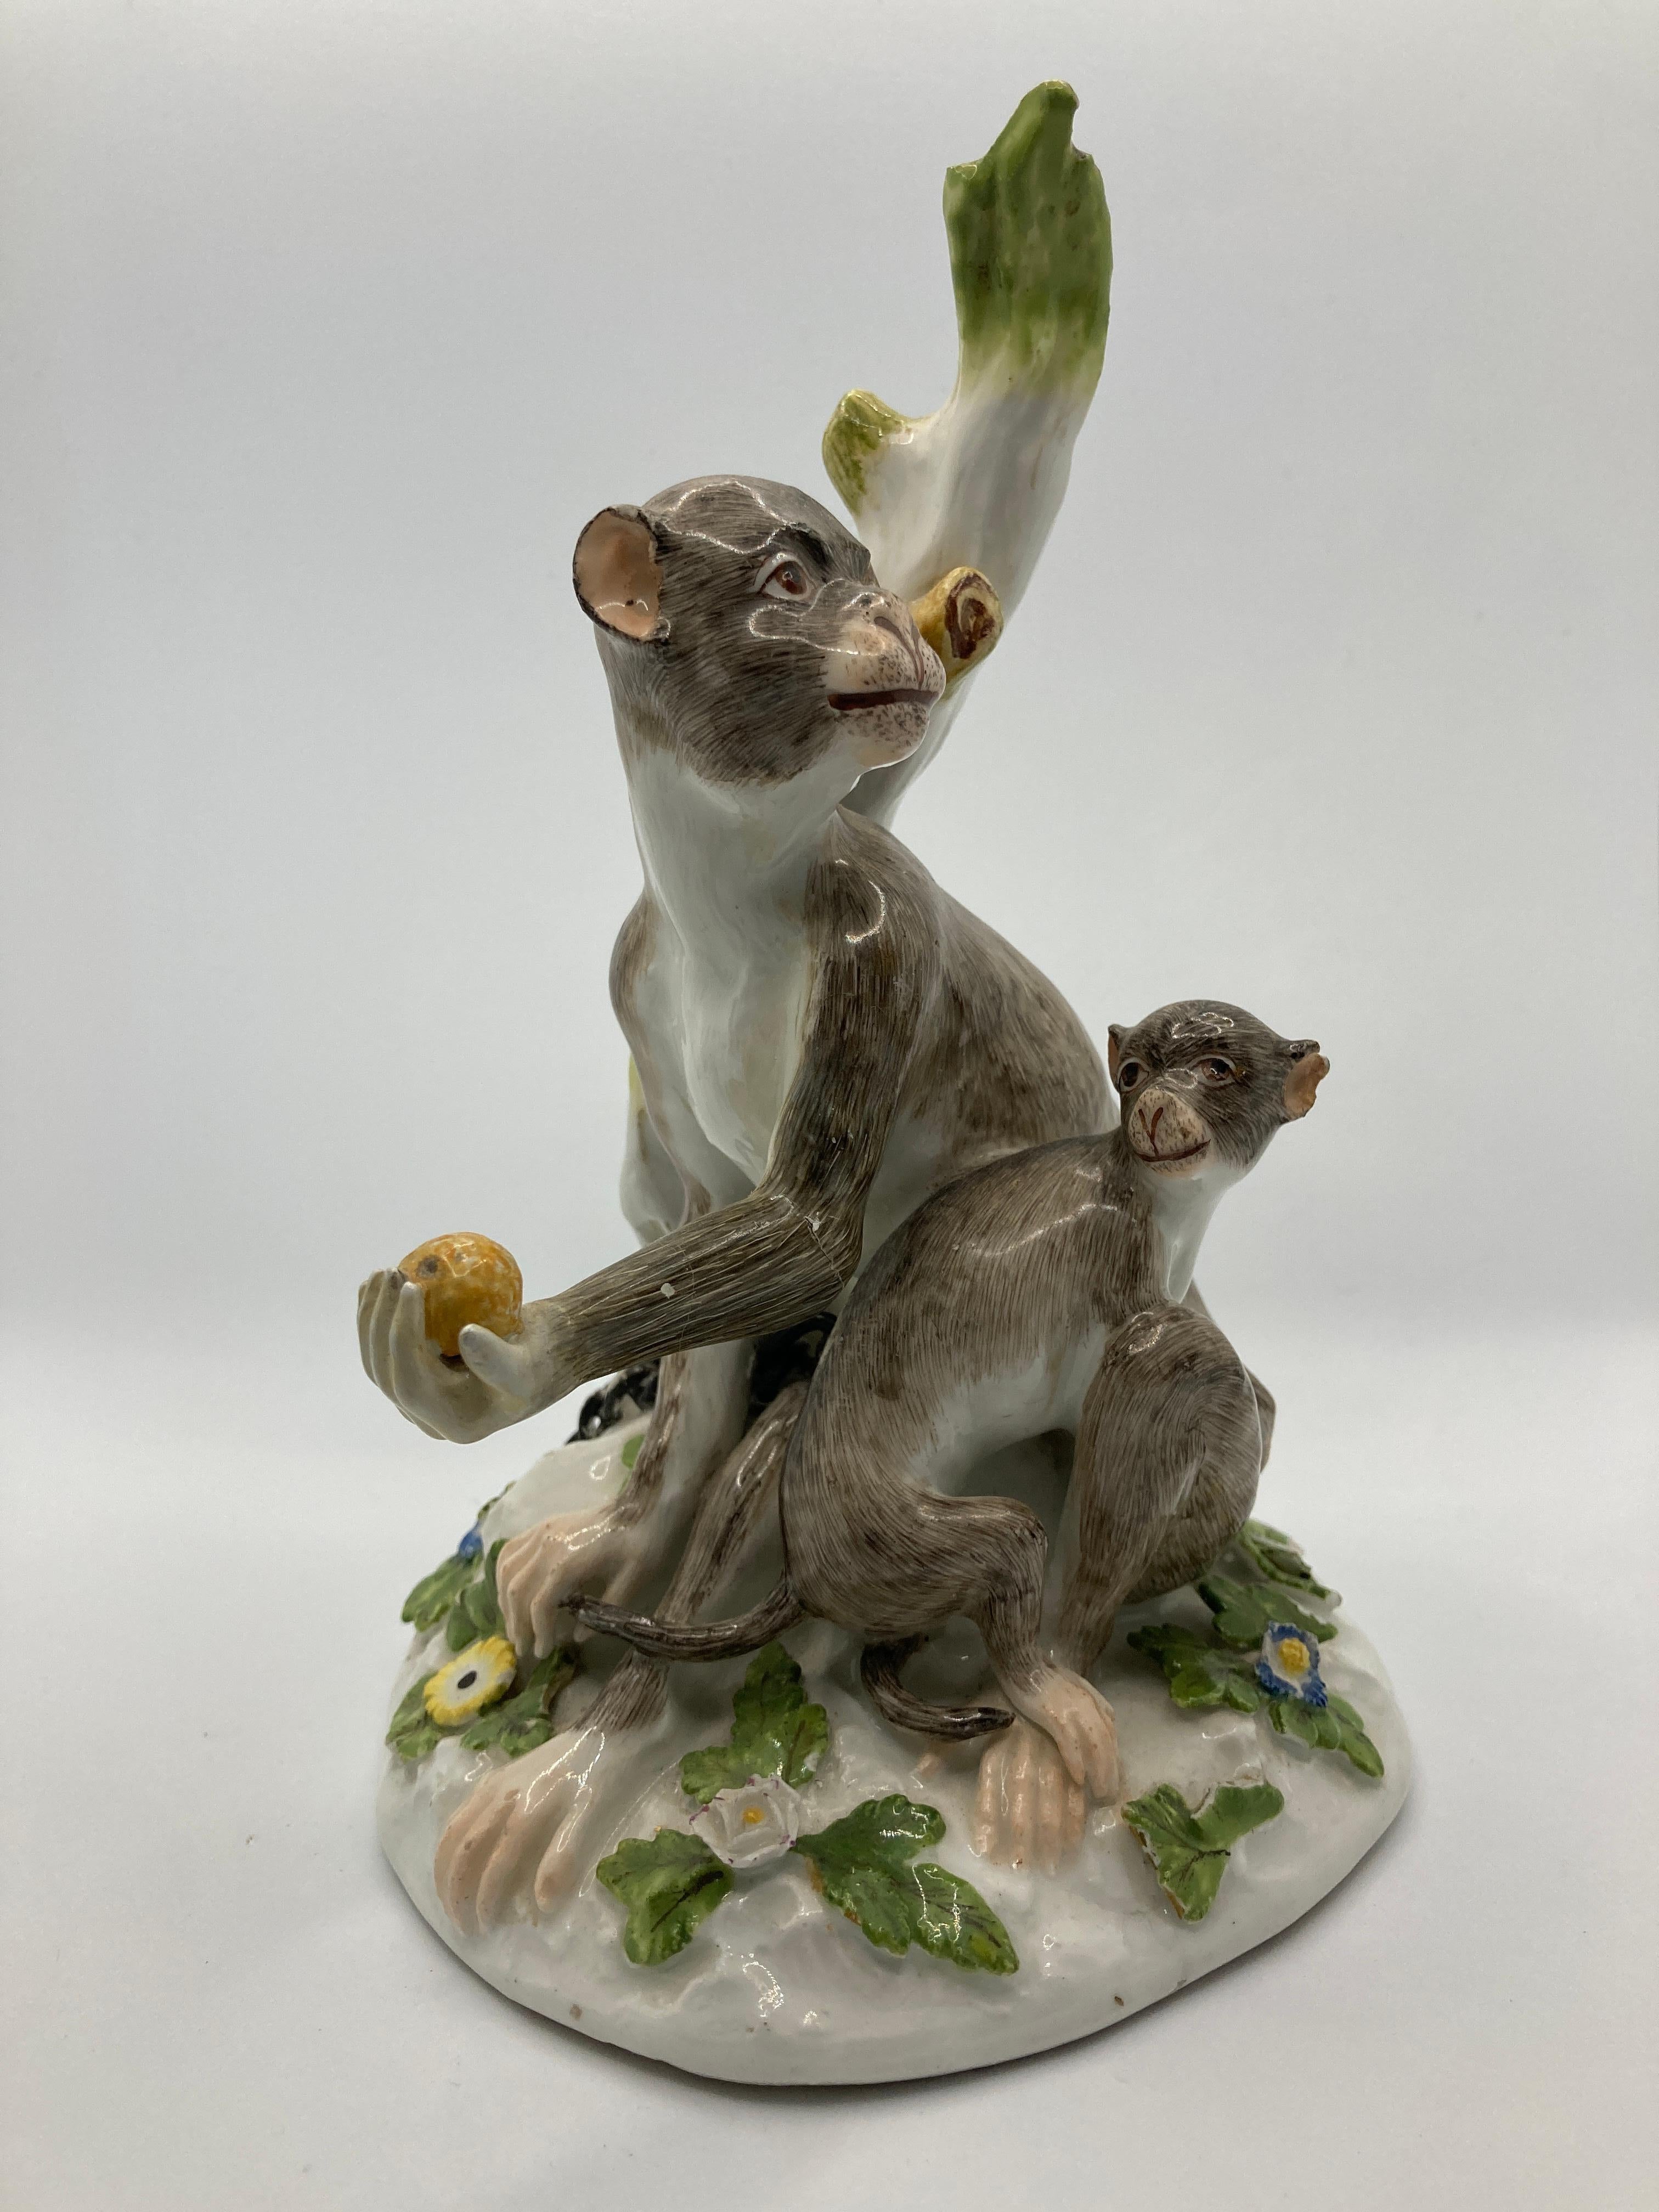 18th Century Meissen Porcelain Figure, Rhesus Monkey and child, model 1464, circa 1750 .  

Modelled by J.J. Kändler. Monkey, with outstretched hand holding fruit, and child chained to a tree stump, sitting on an oval mound base applied with flowers